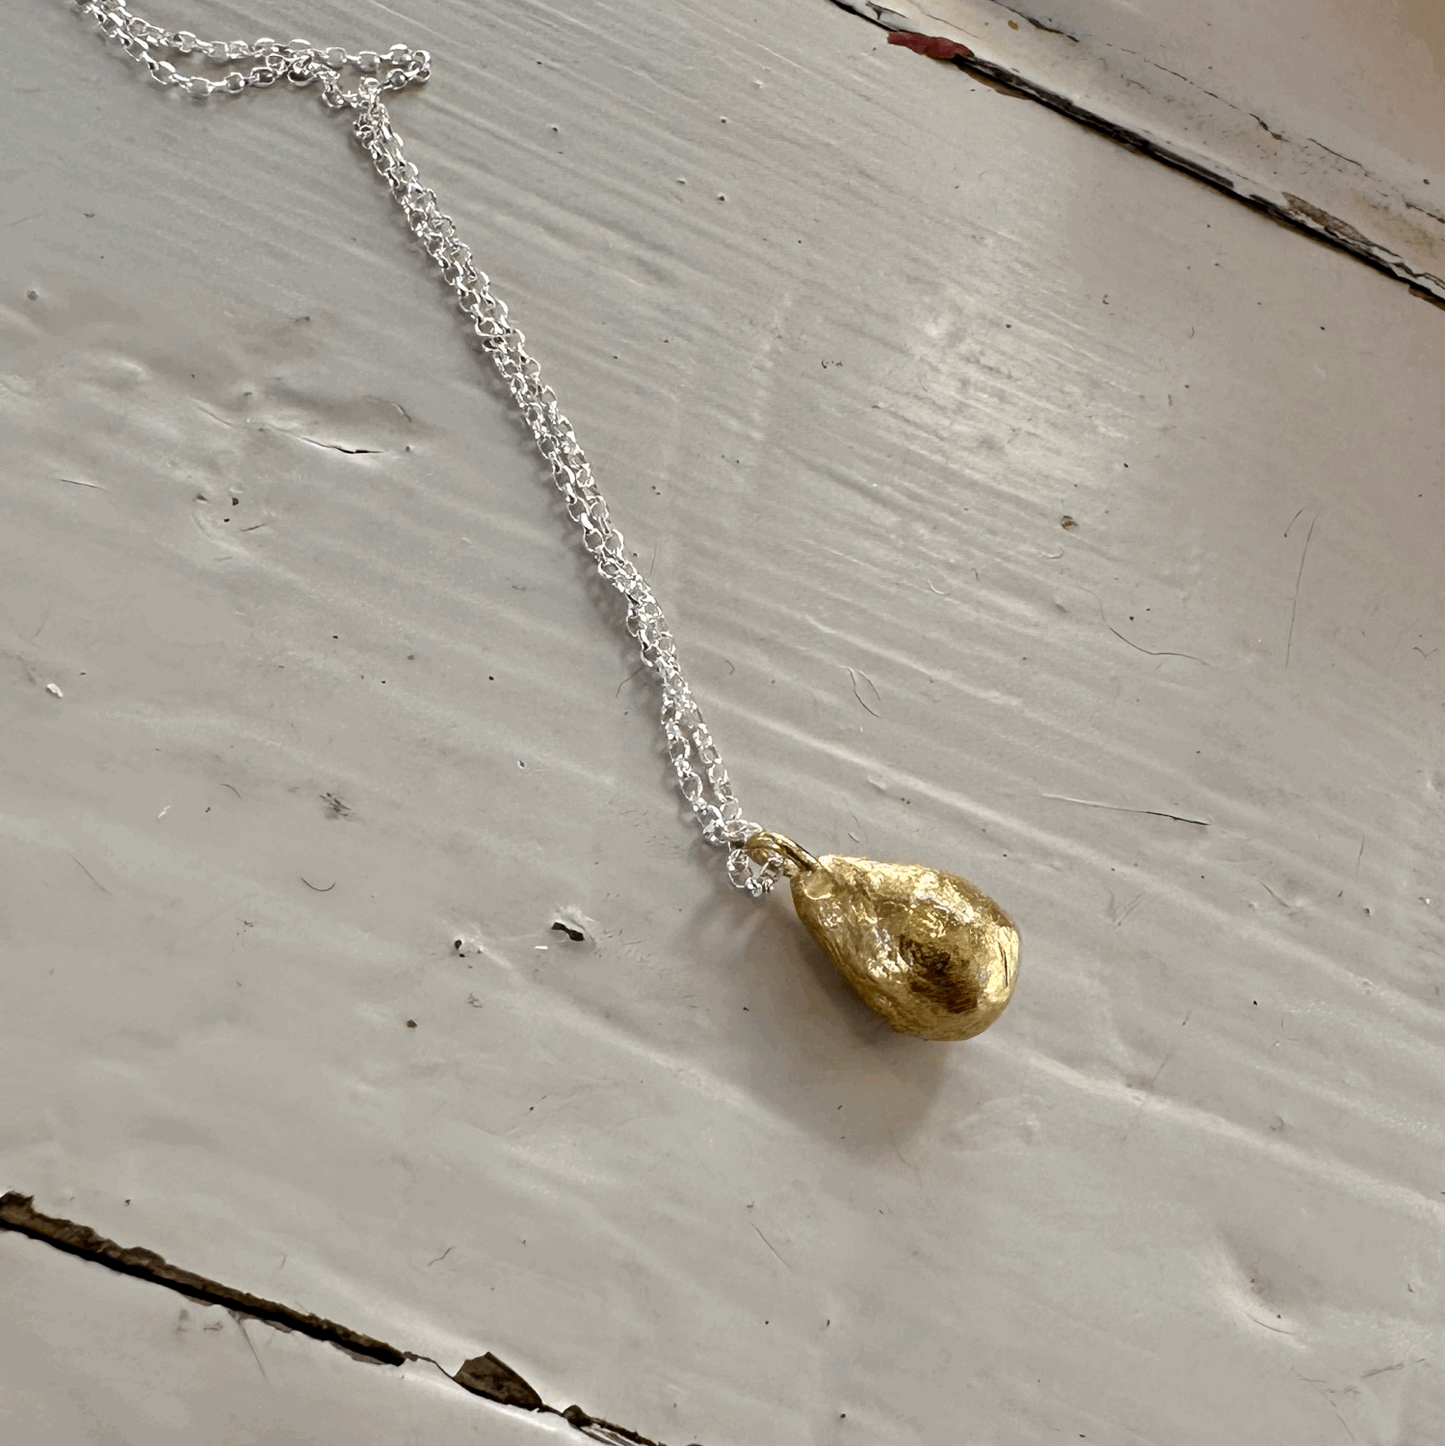 Pearly Dew Drop Necklace: A sweet little drop of solid recycled brass on a recycled silver chain.